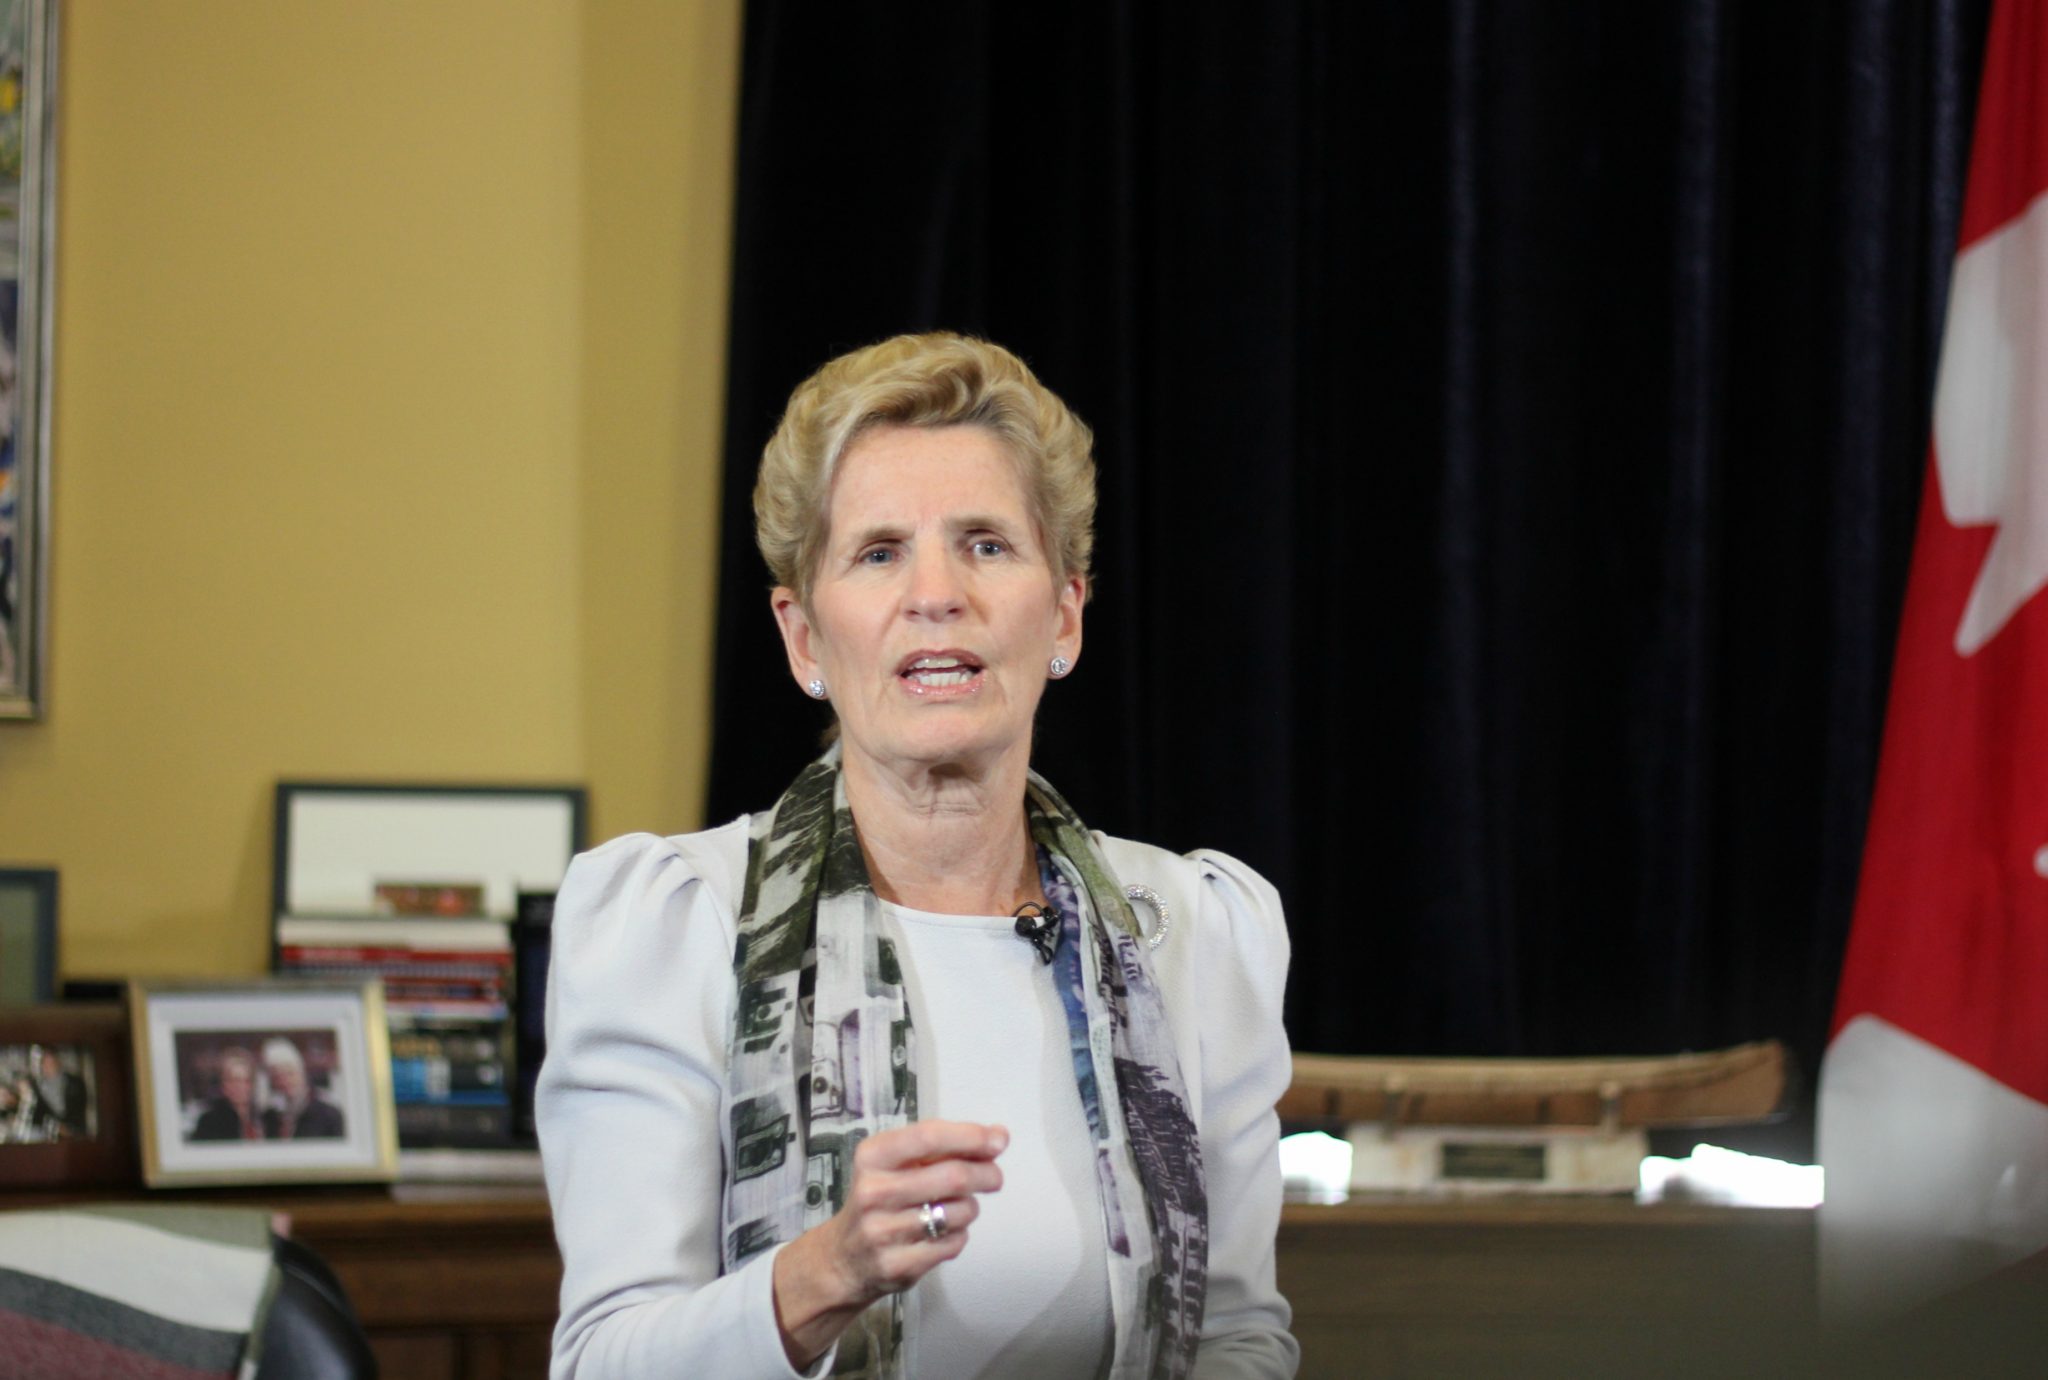 Wynne gets personal with Trump over steel tariffs, citing his ‘inexhaustible vanity’